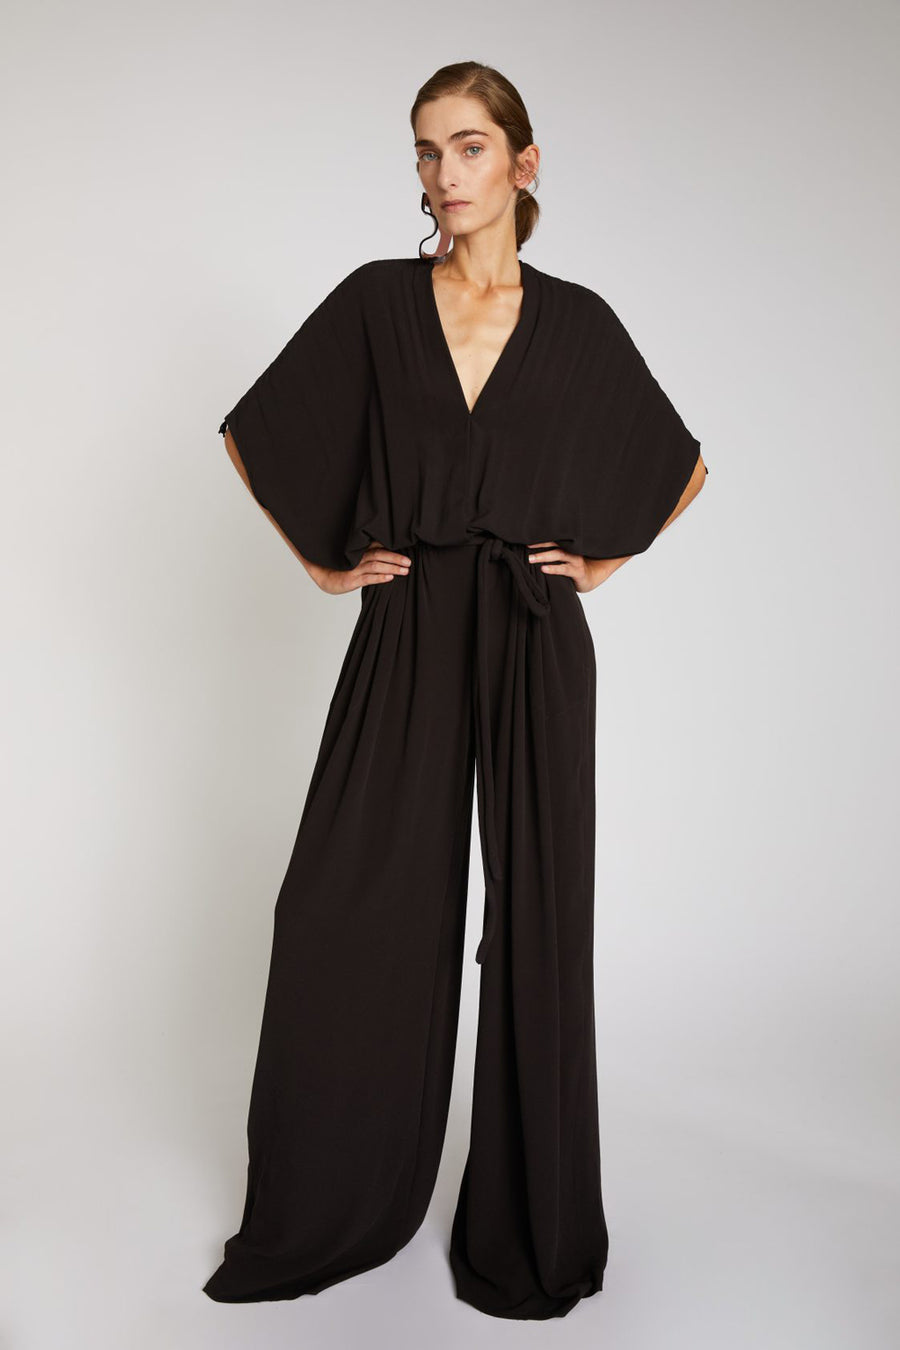 VERONIQUE LEROY - Gathered Jumpsuit in Choco